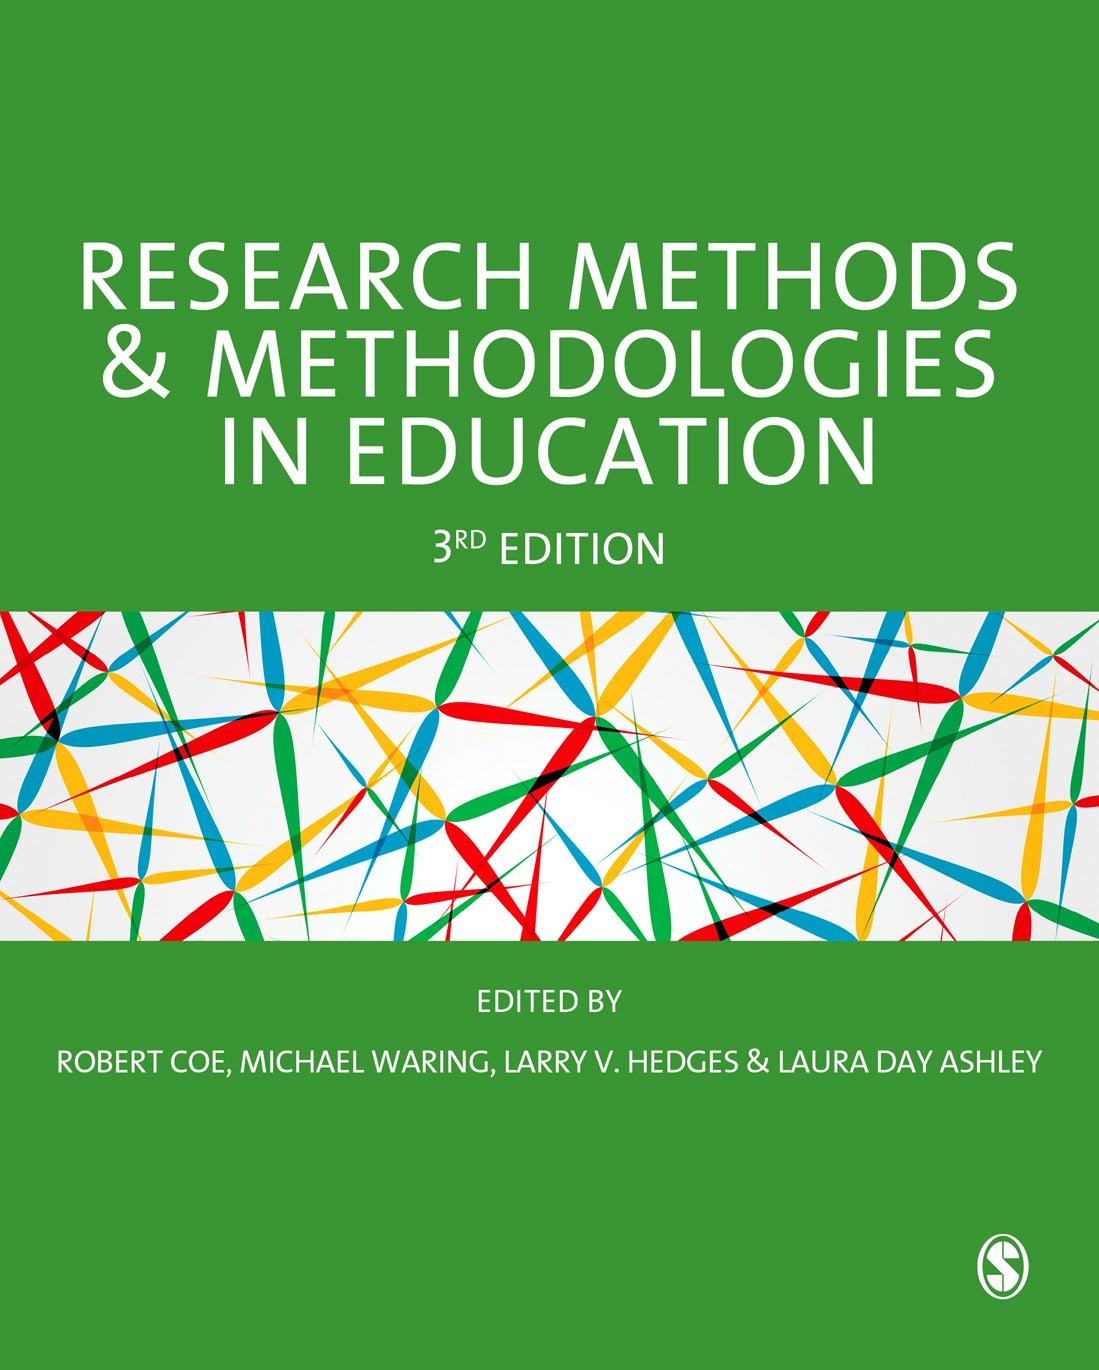 Research Methods and Methodologies in Education book cover